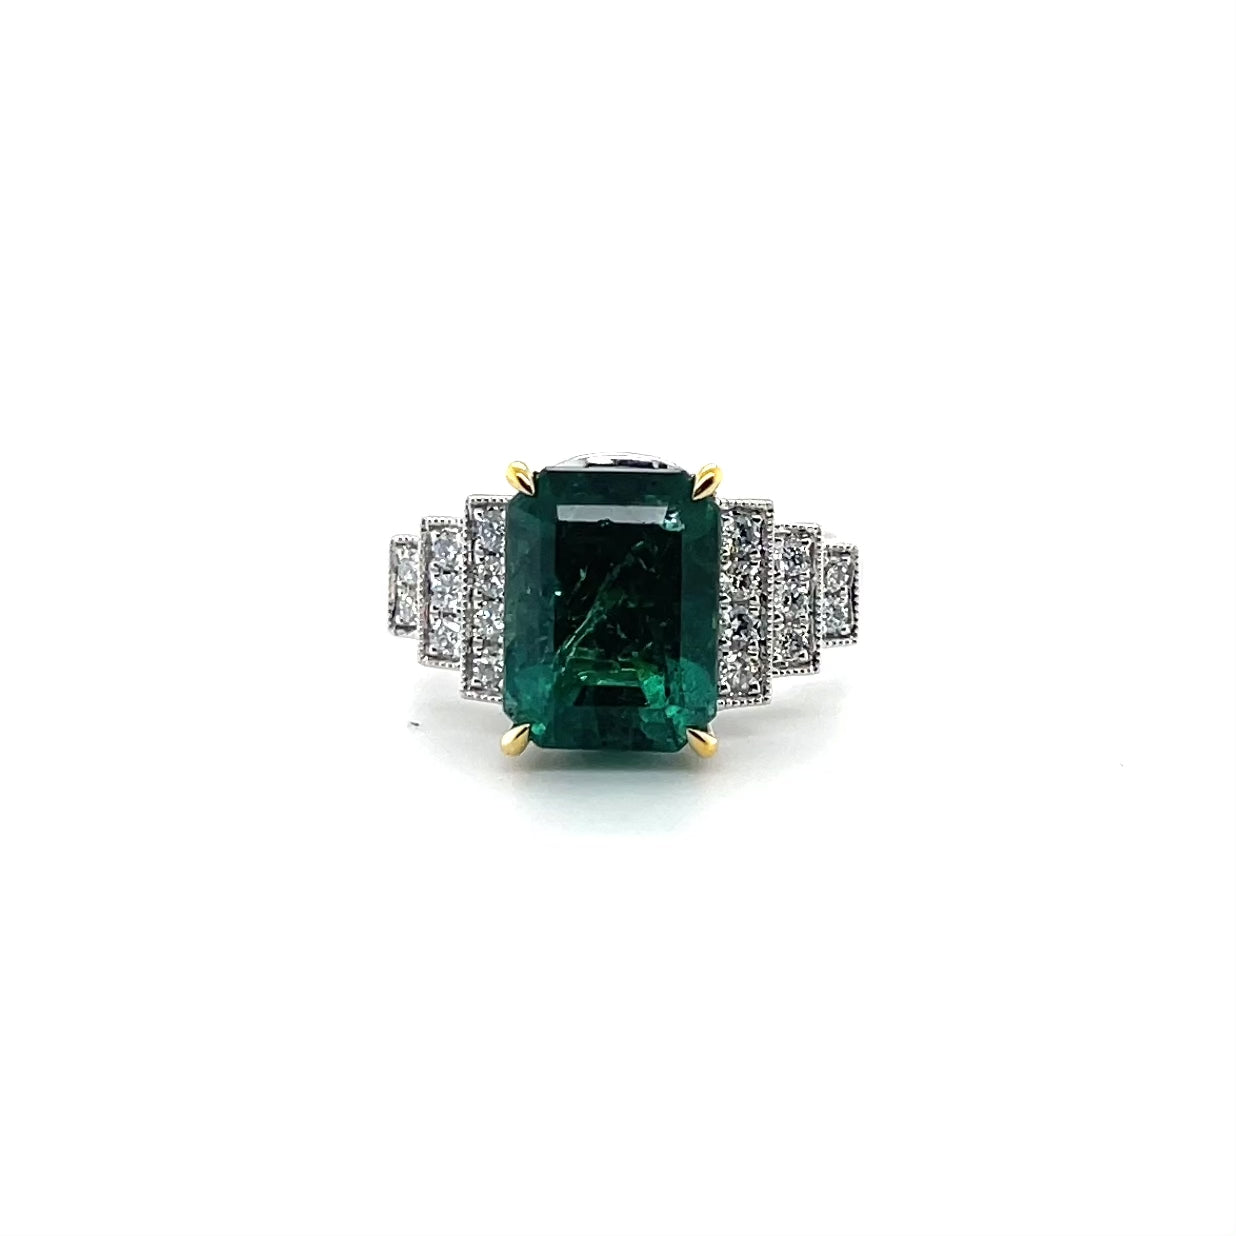 18ct white gold Art Deco style emerald and diamond ring